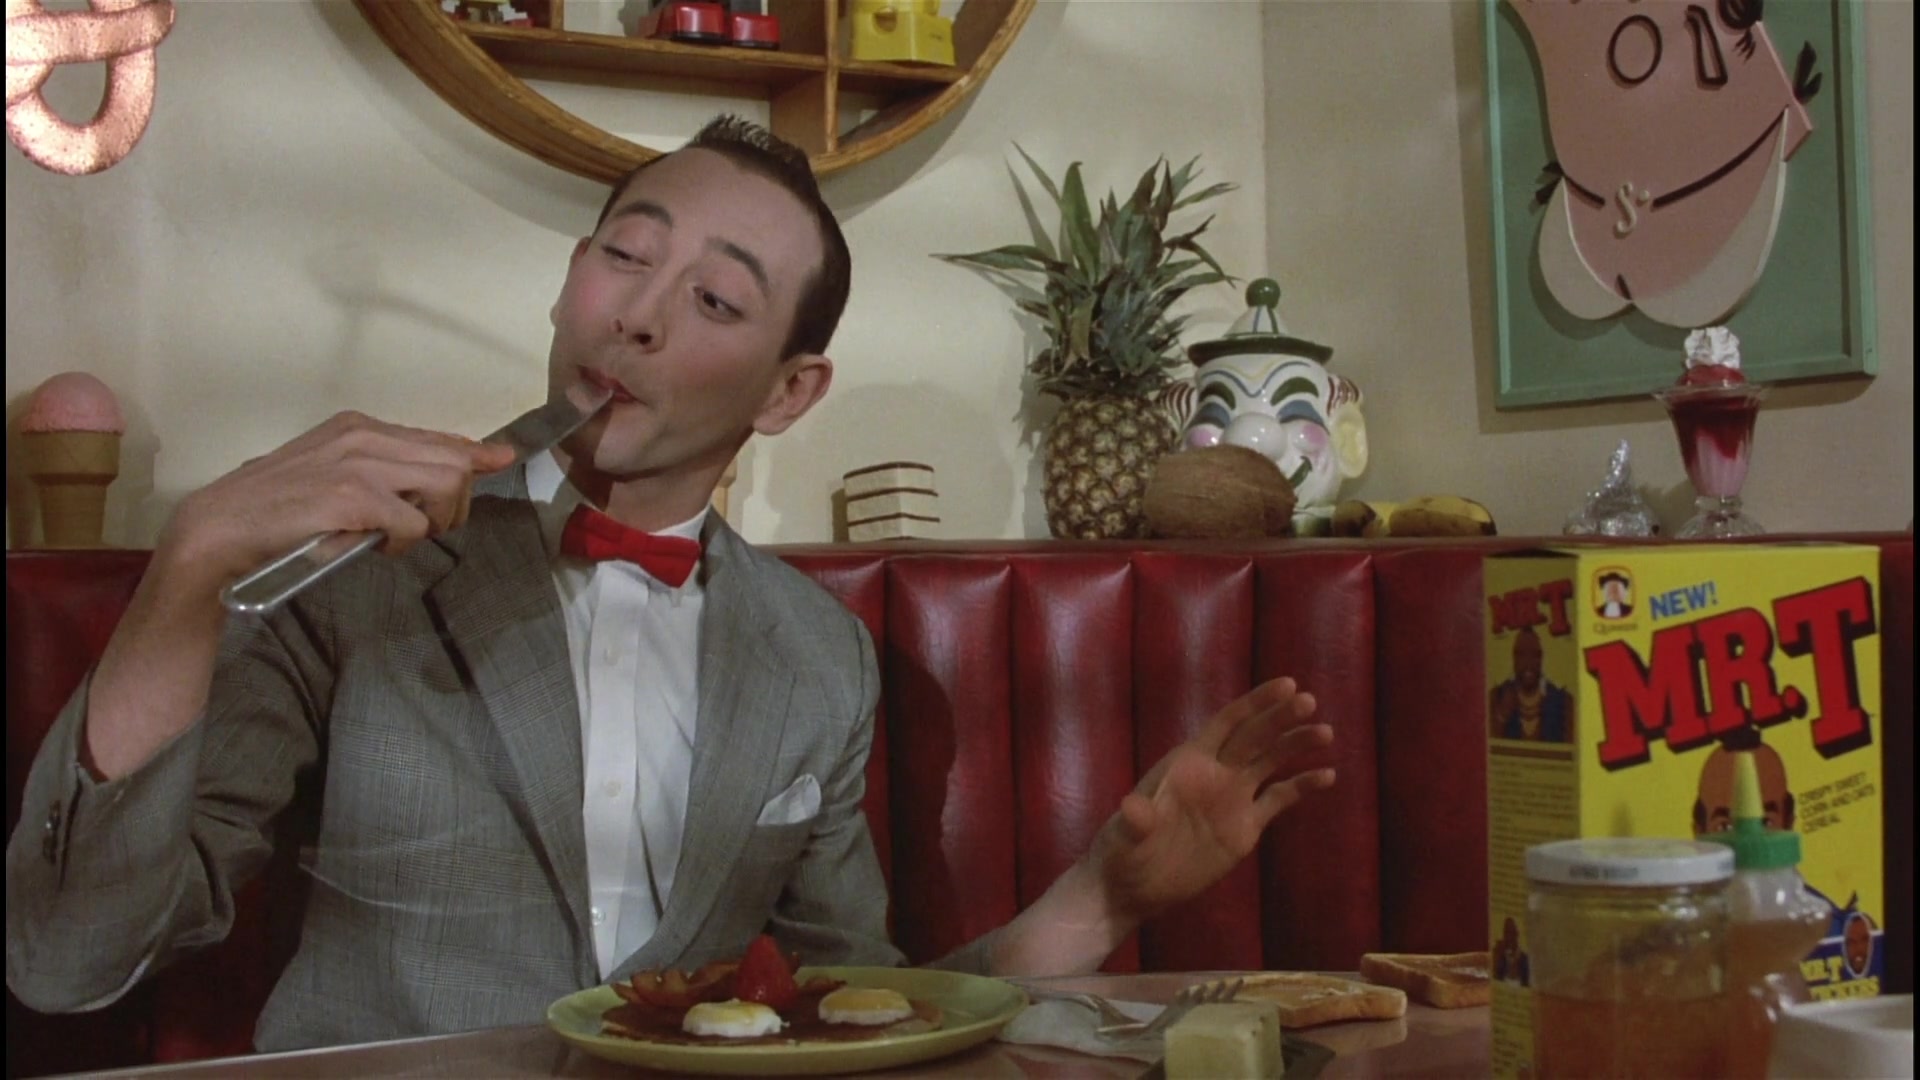 ...Mr. T Cereal by Quaker Oats Company Enjoyed by Paul Reubens in Pee-wee’s...